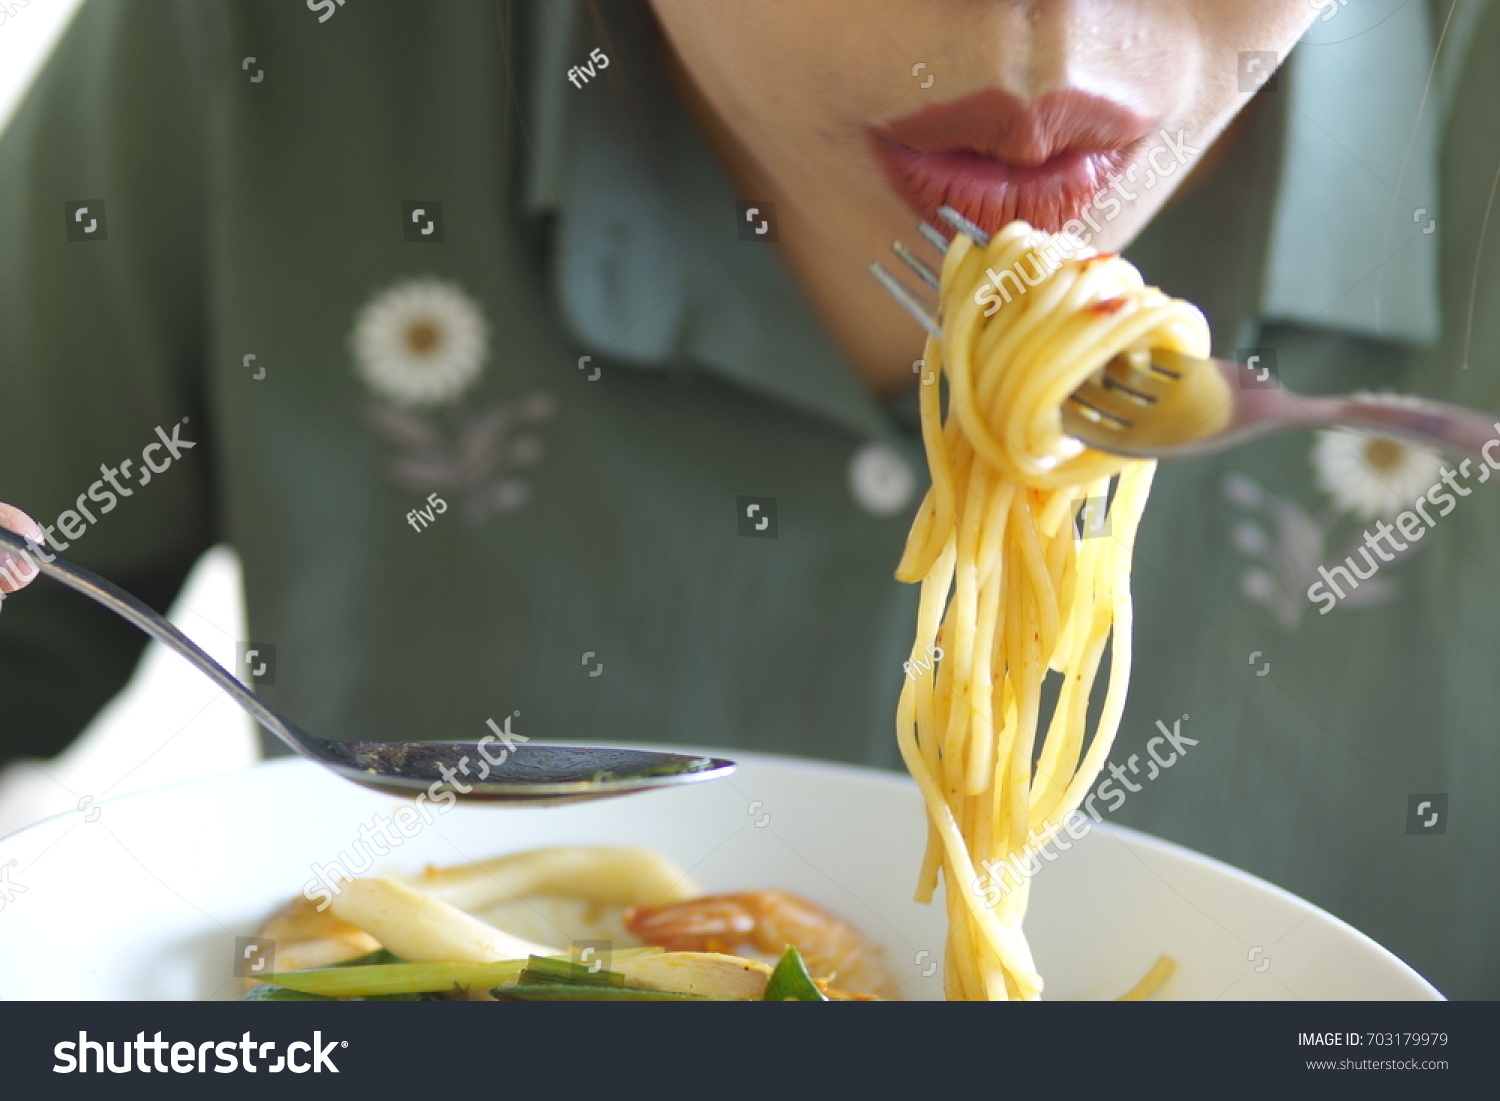 eating spaghetti with fork #703179979